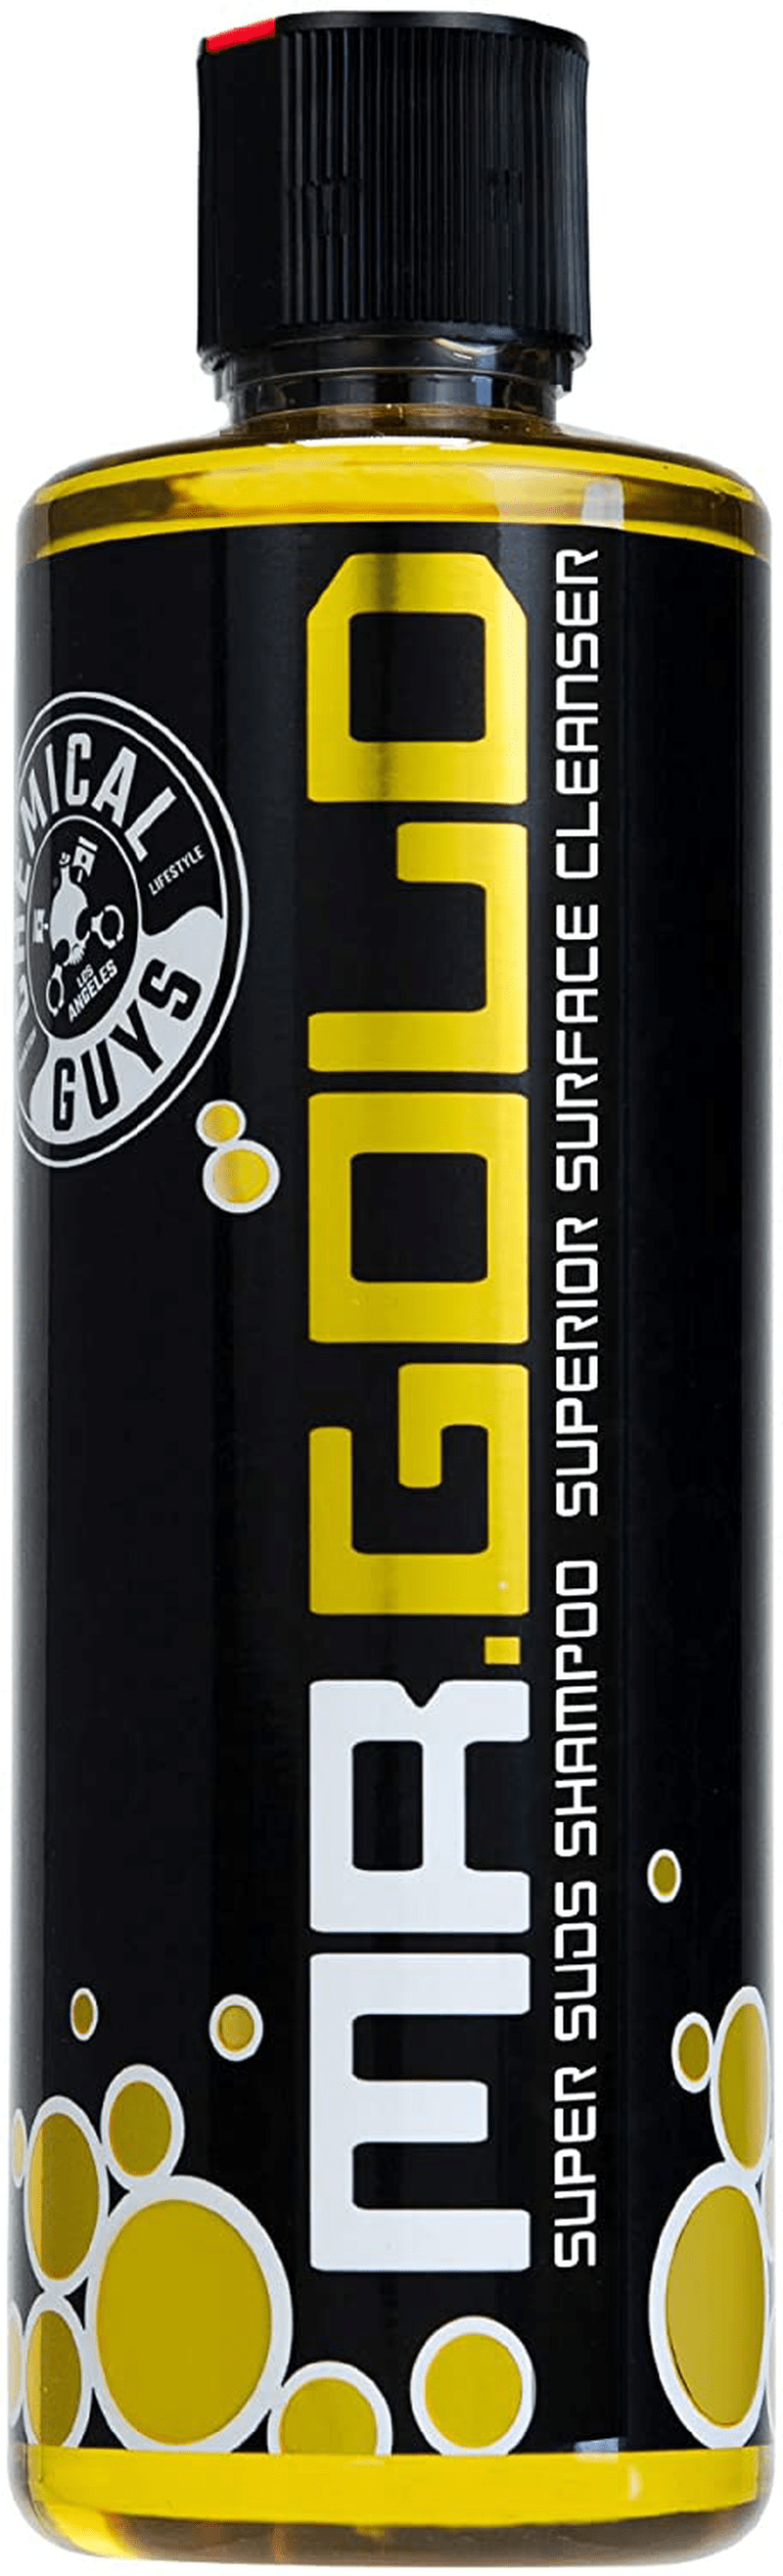 Chemical Guys CWS_402_64 Mr. Pink Foaming Car Wash Soap (Works with Foam Cannons, Foam Guns or Bucket Washes), 64 oz., Candy Scent  Chemical Guys Mr. Gold 16 oz 